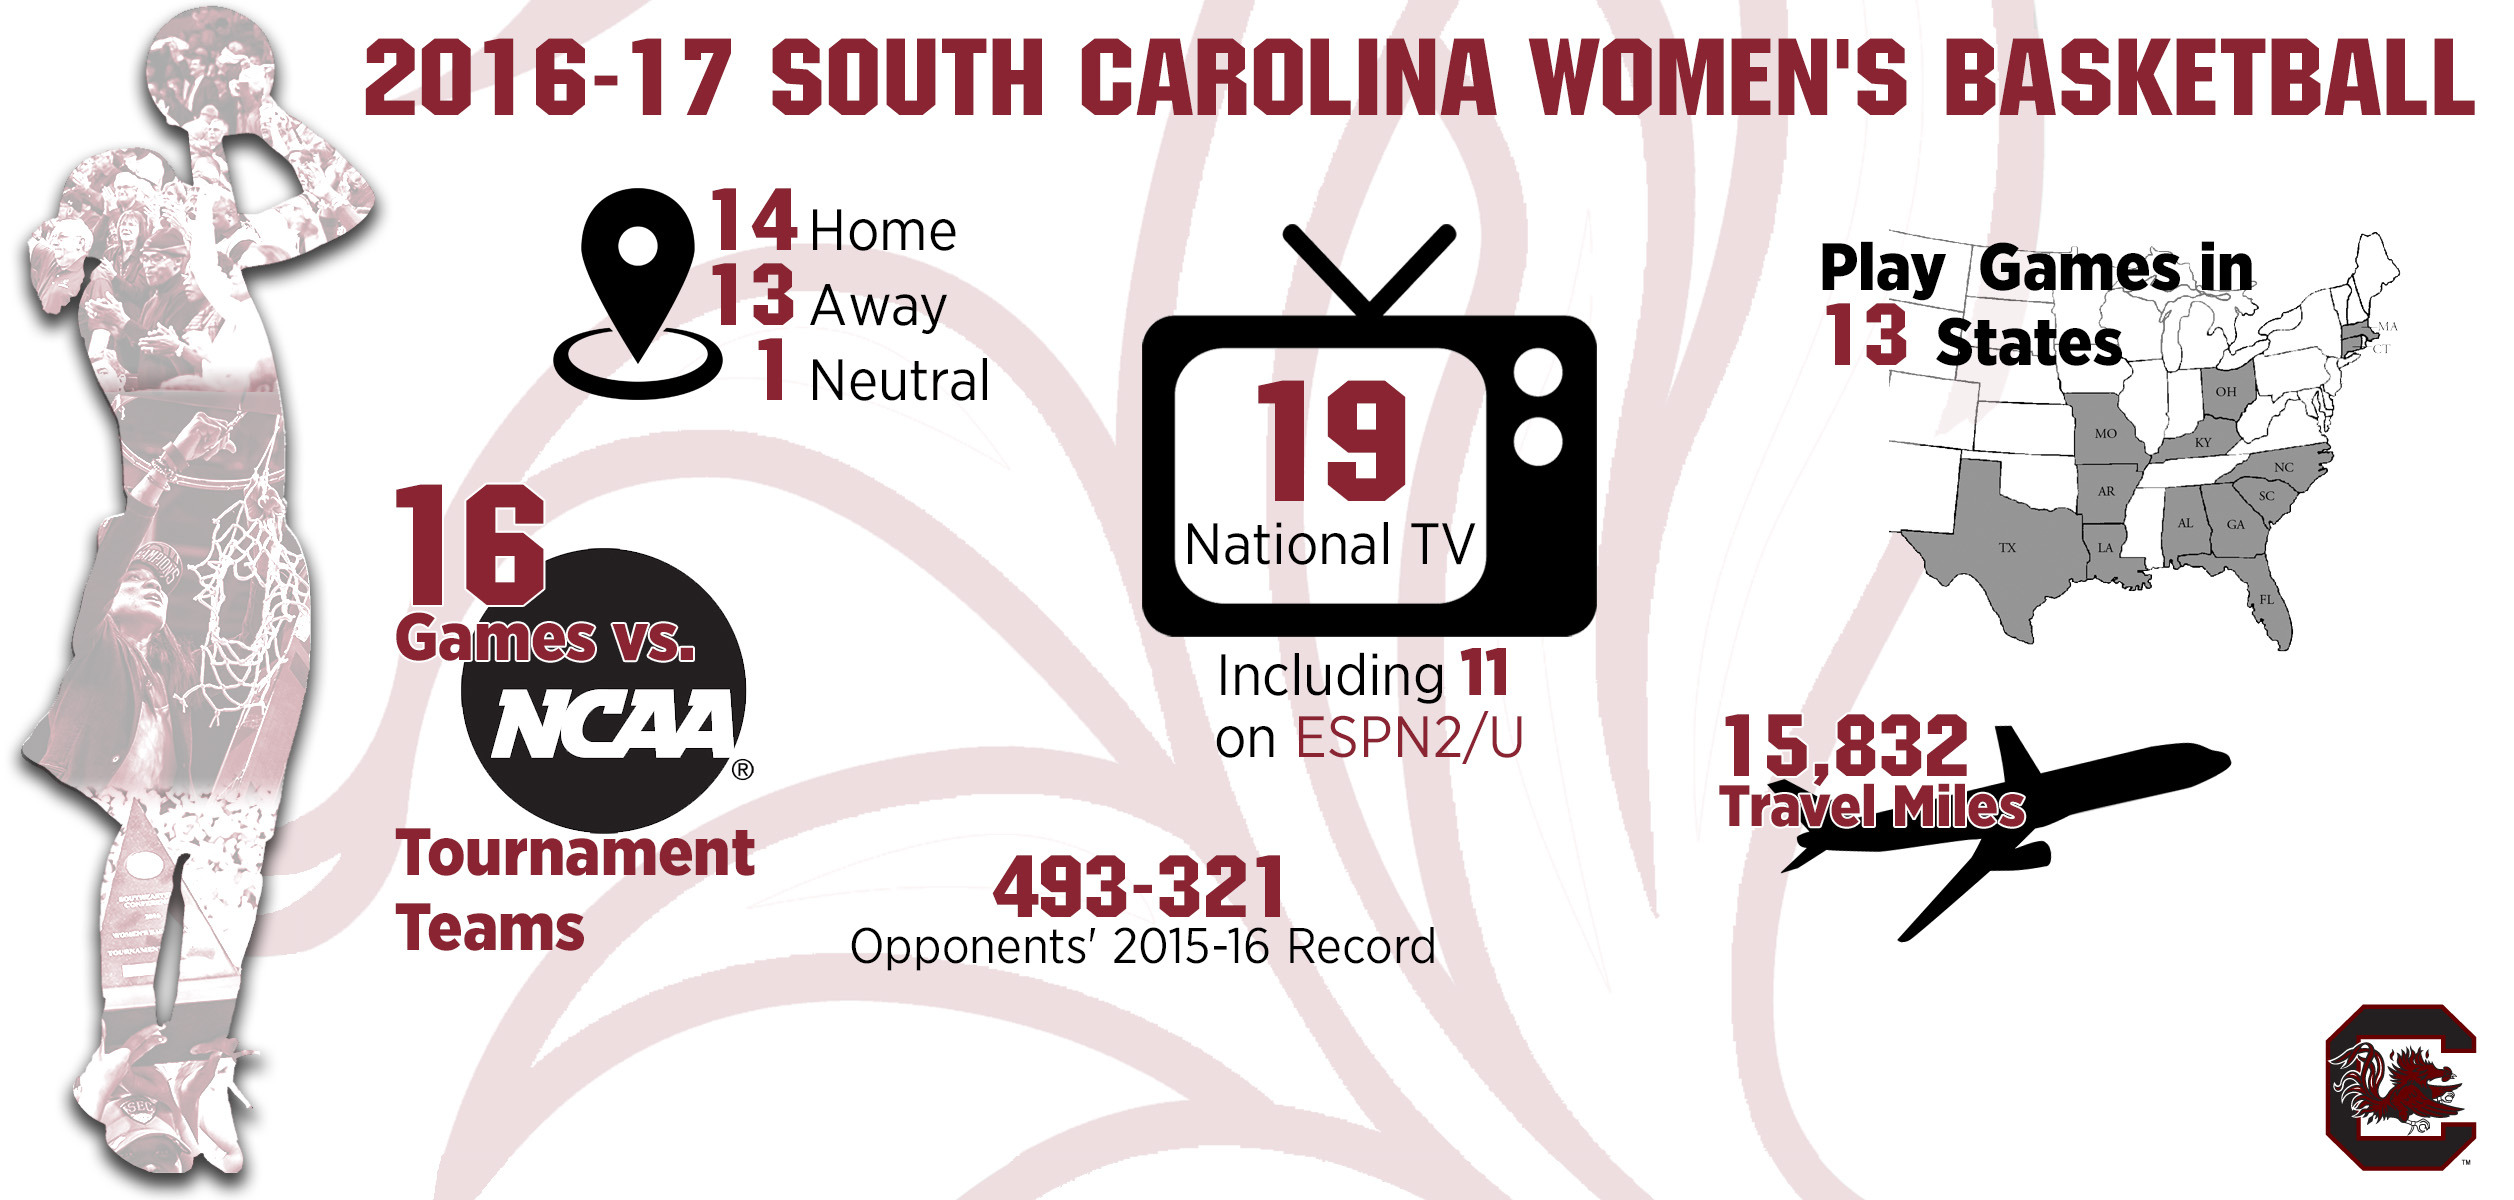 Gamecock Schedule Features 19 National TV Games